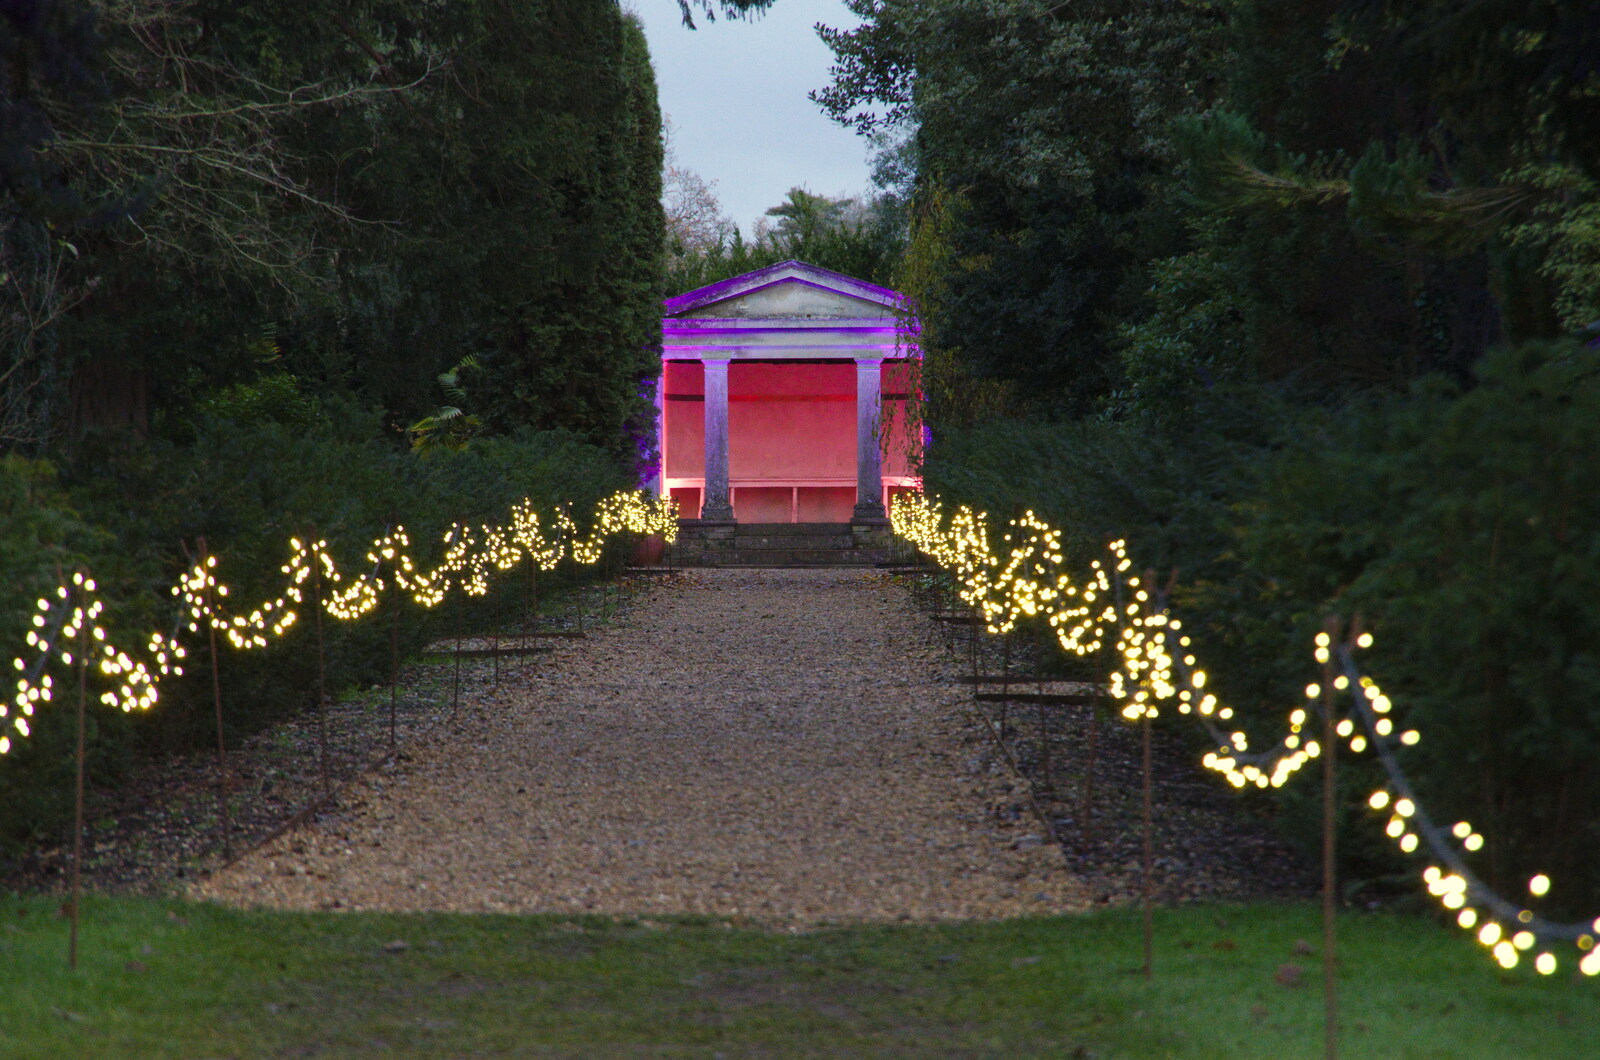 Twinkly lights on the way to a garden shelter from The Tiles of Ickworth House, Horringer, Suffolk - 30th November 2019